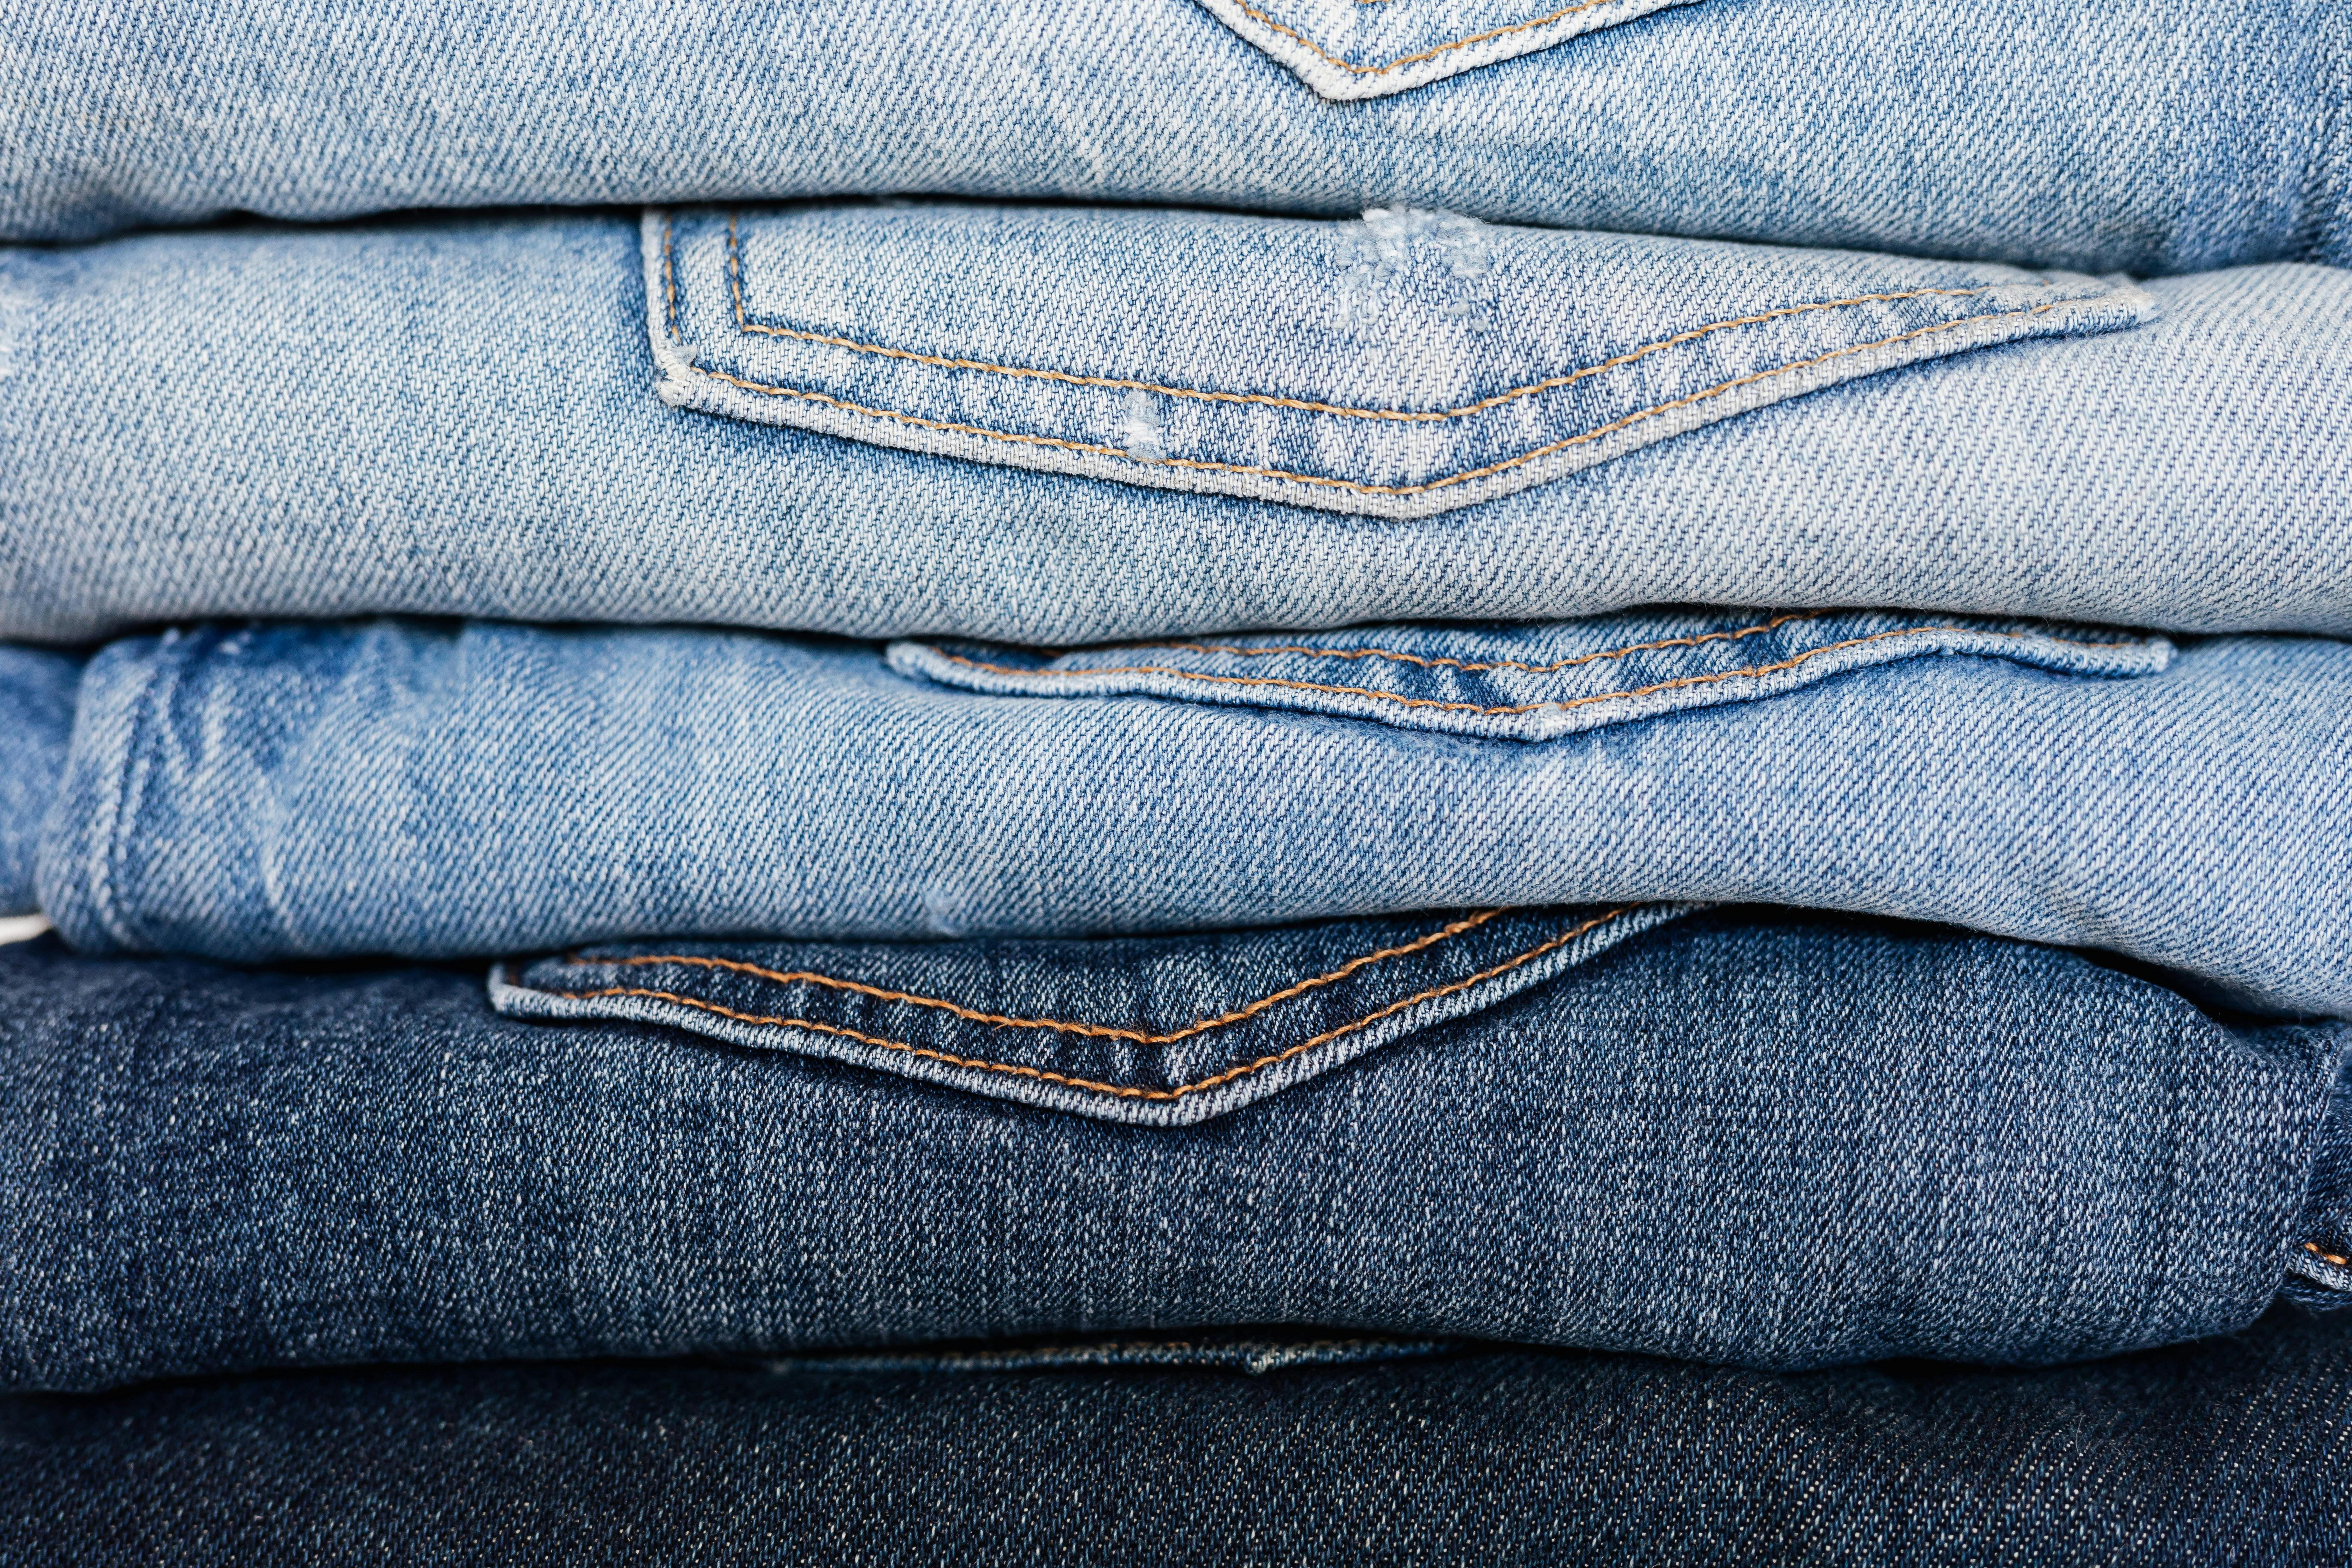 stack of neatly arranged blue jeans